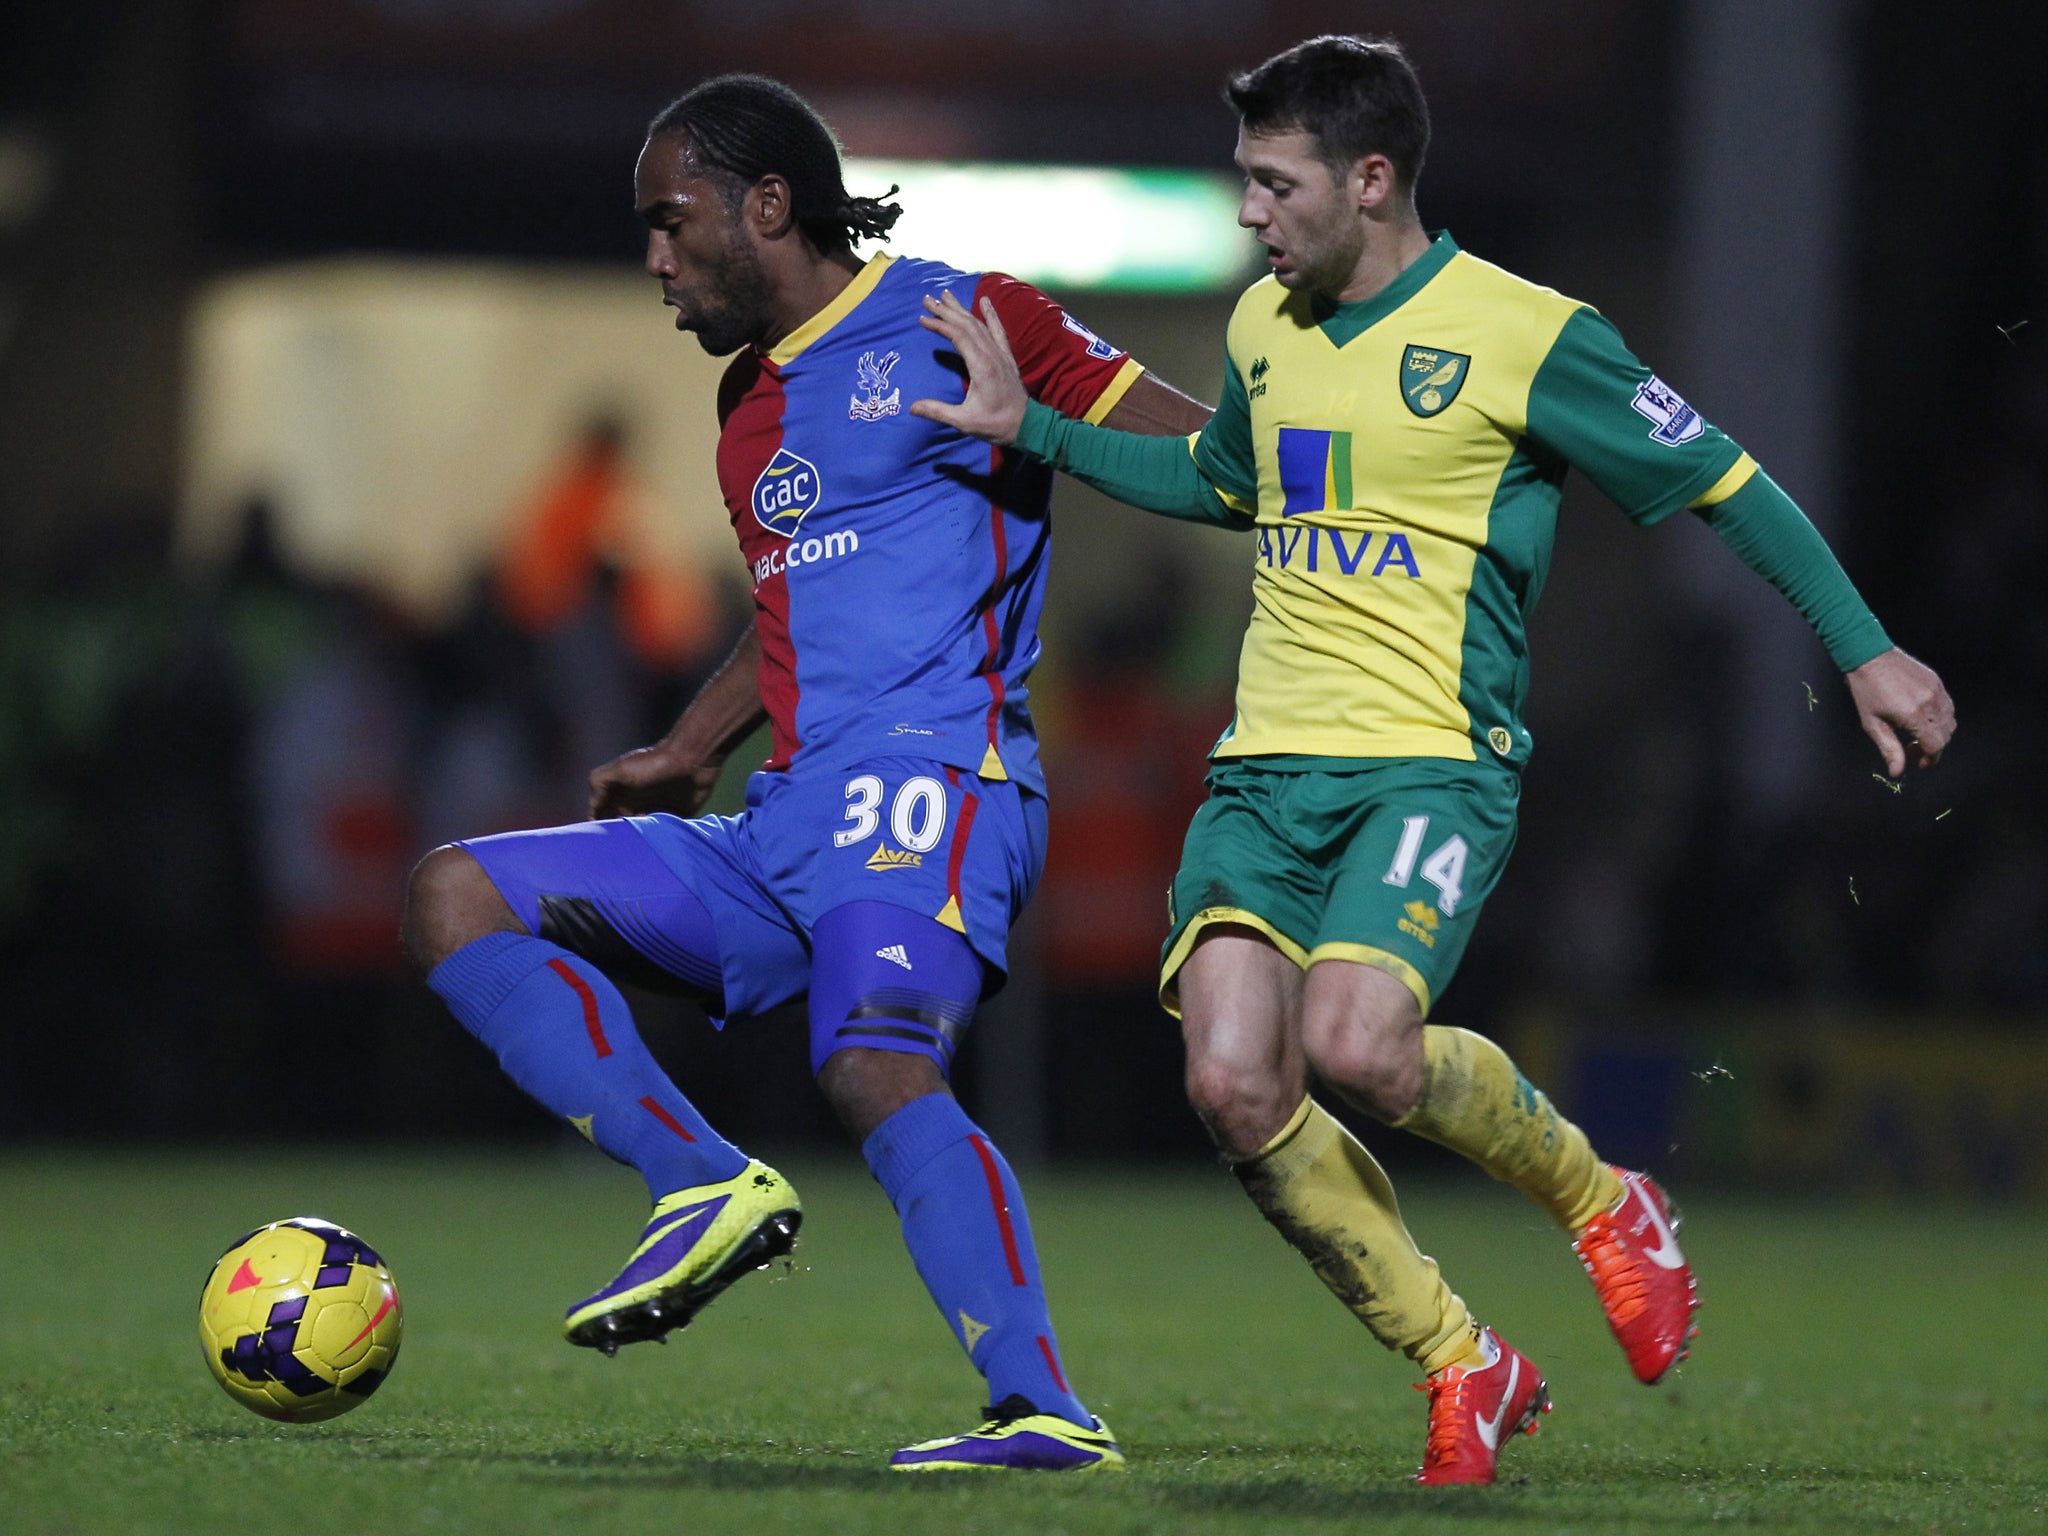 Wes Hoolahan is hoping Norwich can carry momentum from their win over Crystal Palace into midweek match against Liverpool